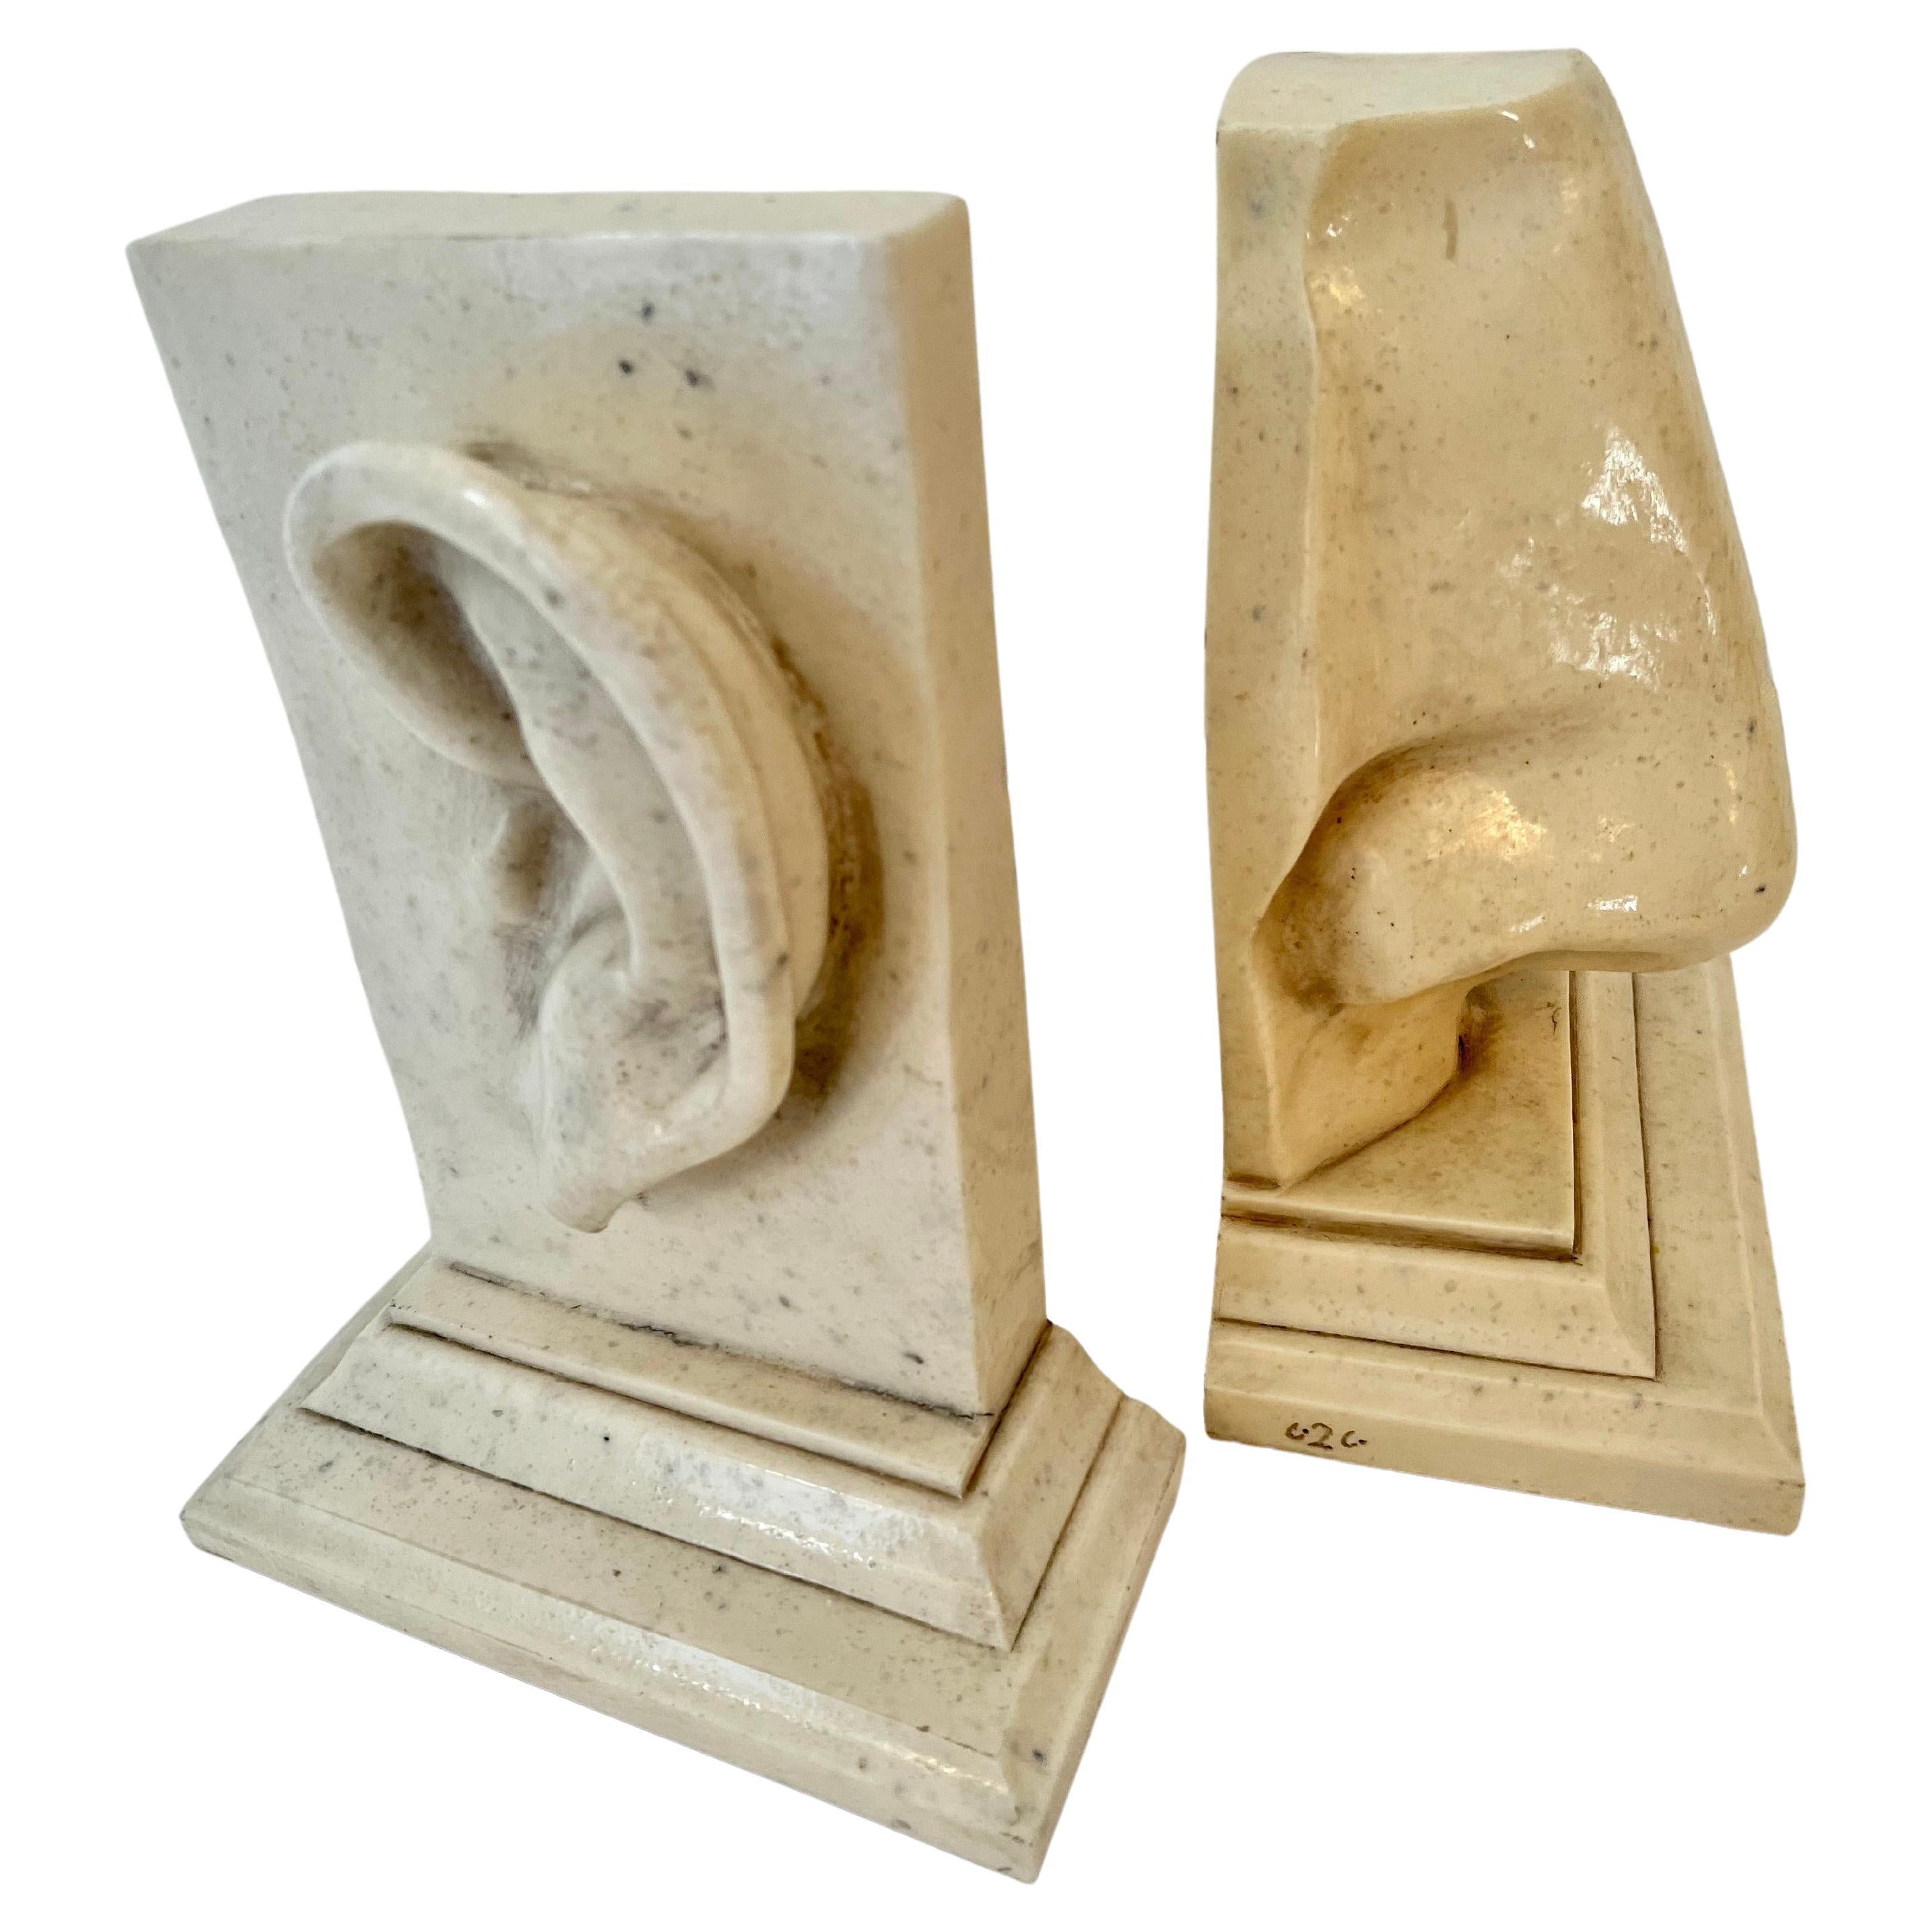 Pair of C2C Designs, a Resin Based Sculptural Ear and Nose Bookend Set For Sale